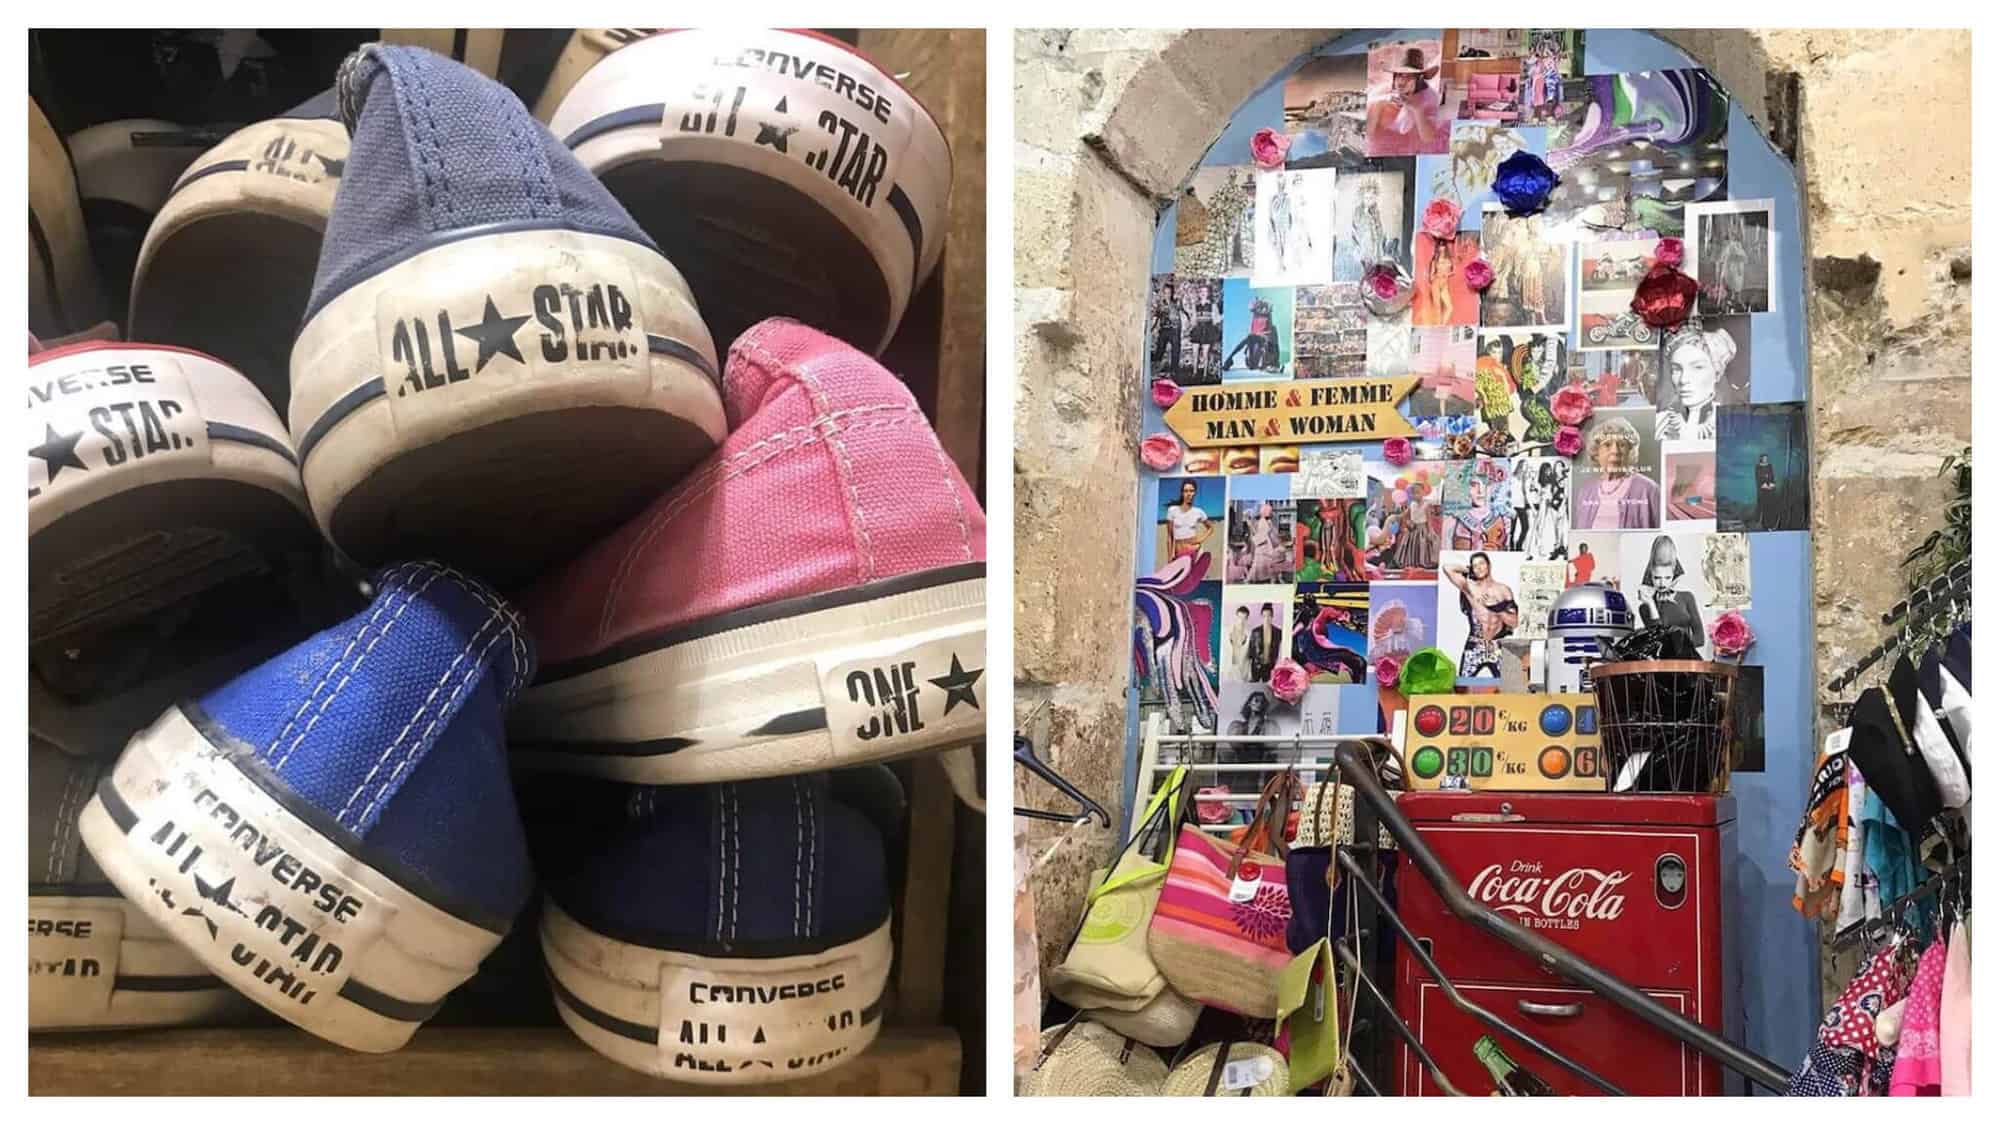 Left: eight Converse sneakers stacked on top of one another. The Converse All Star logo is visible. Right: Interior of Kilo Shop with a collage of several photos, several hats and scarves to the right, a red Coca Cola fridge, and several handbags to the left. 